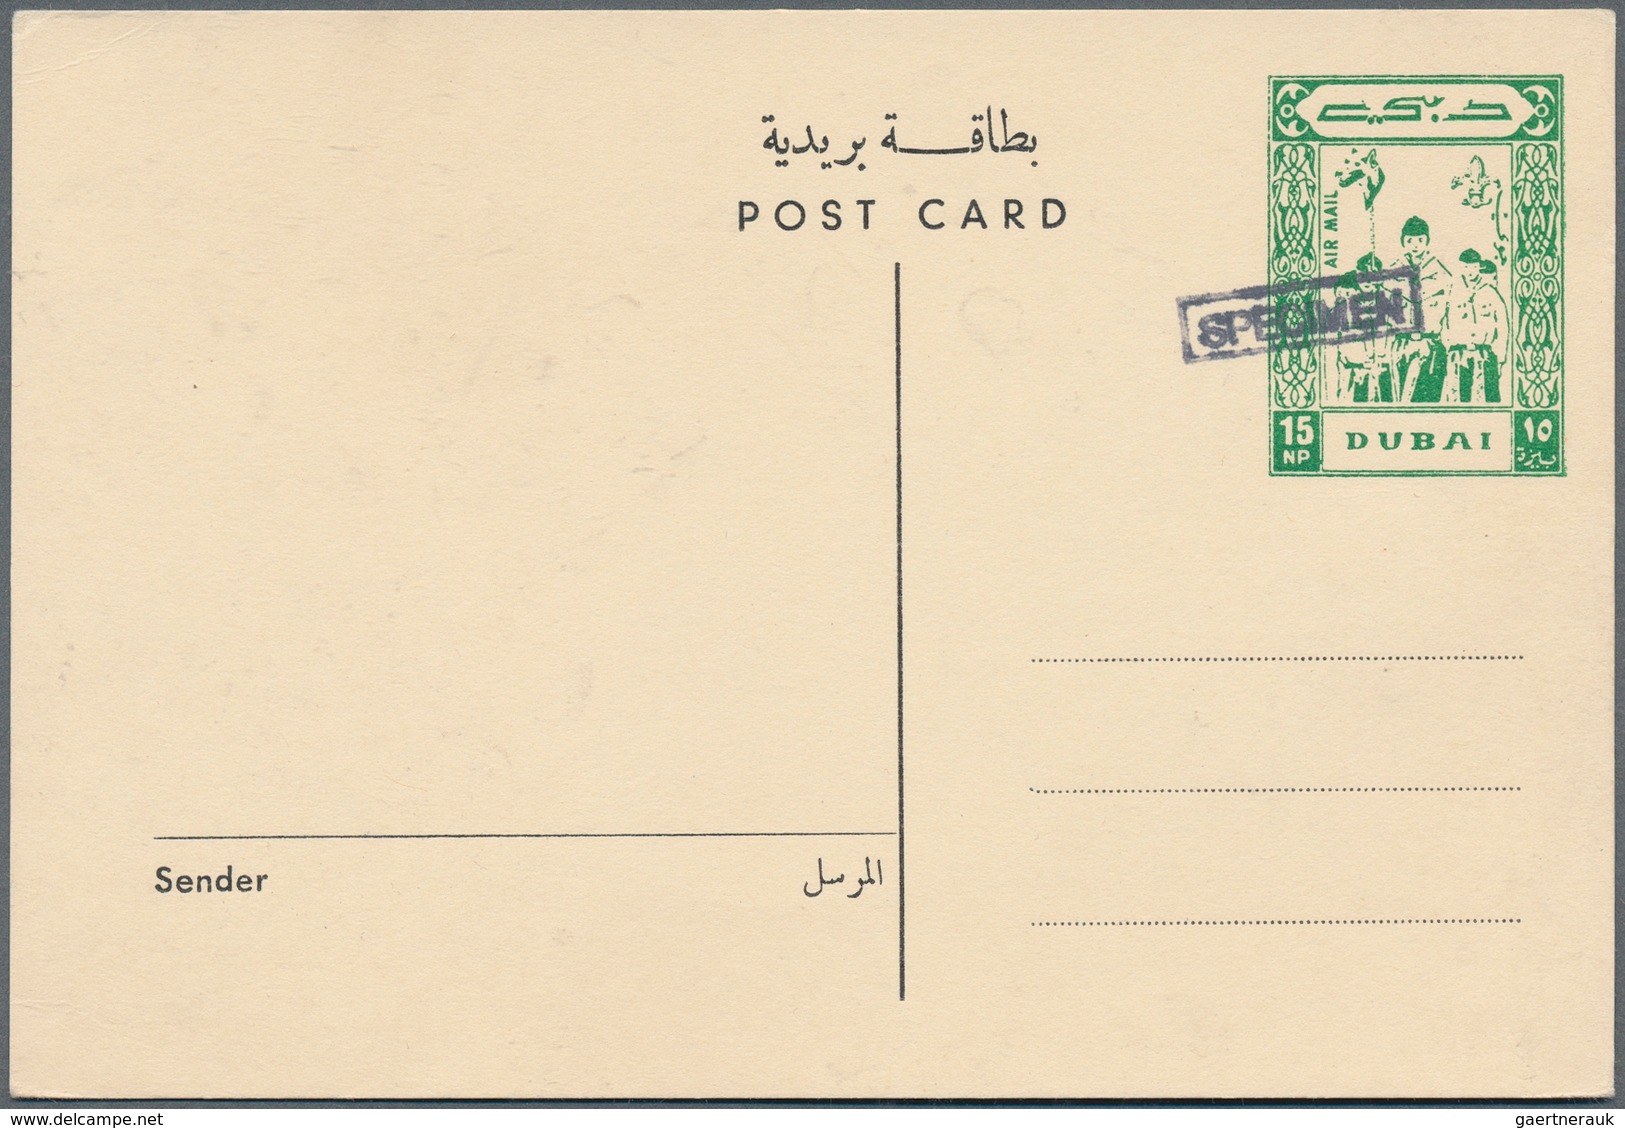 Dubai: 1964, Boy Scouts/Olympics overprints, collection of apprx. 80 stationeries (cards and airlett